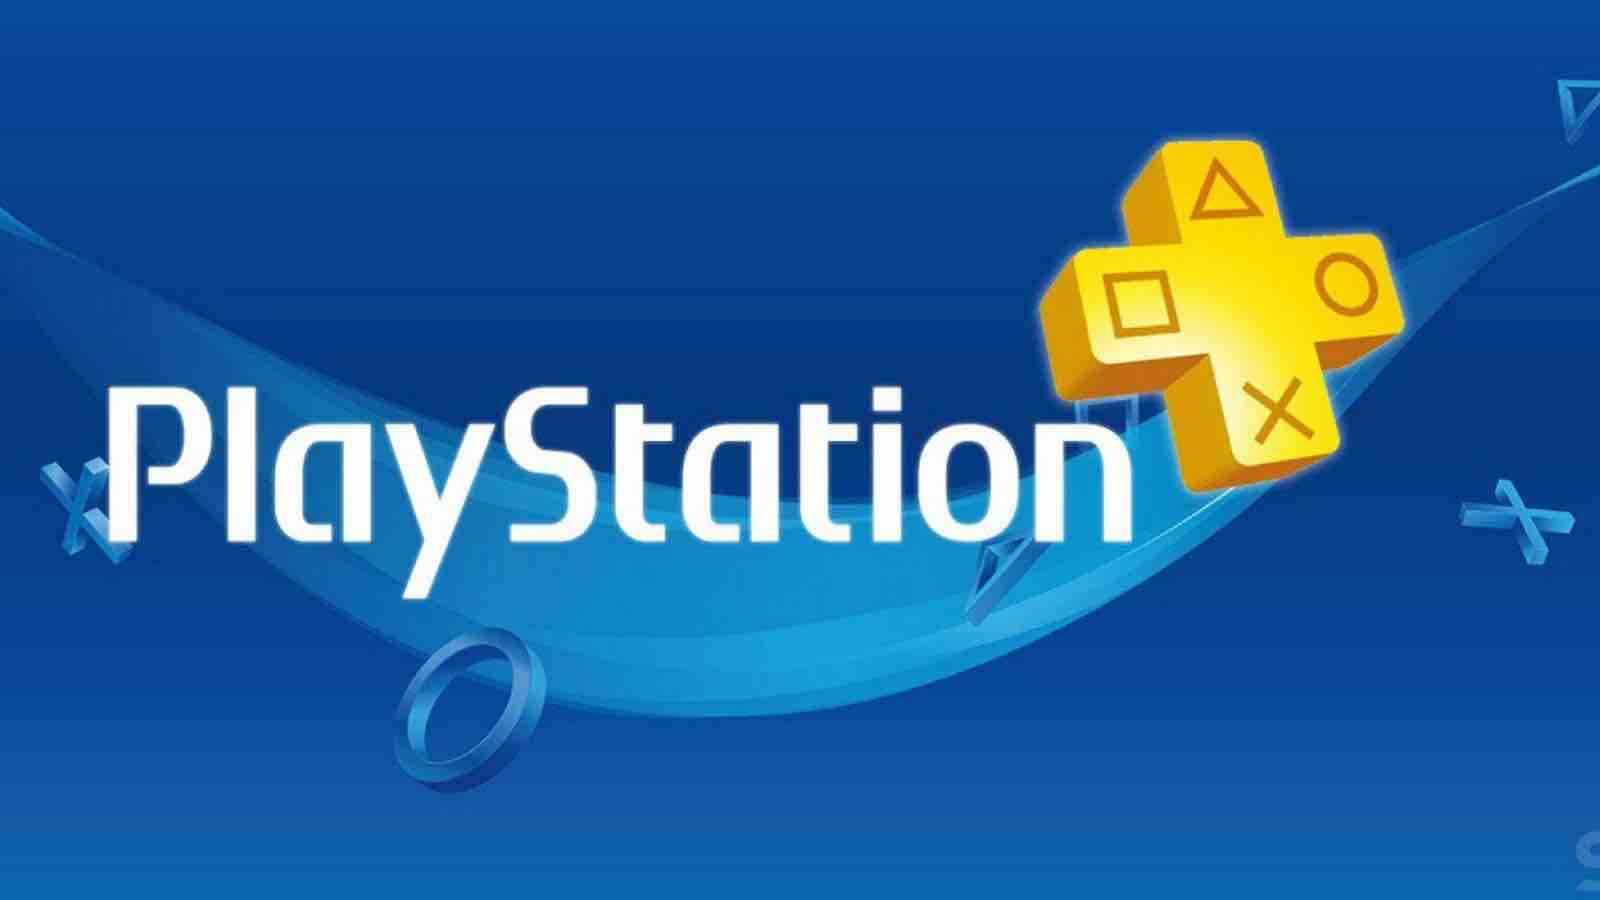 All Free PS Plus Games For PS3, PS Vita, PS4, PS5 - Every PS Plus